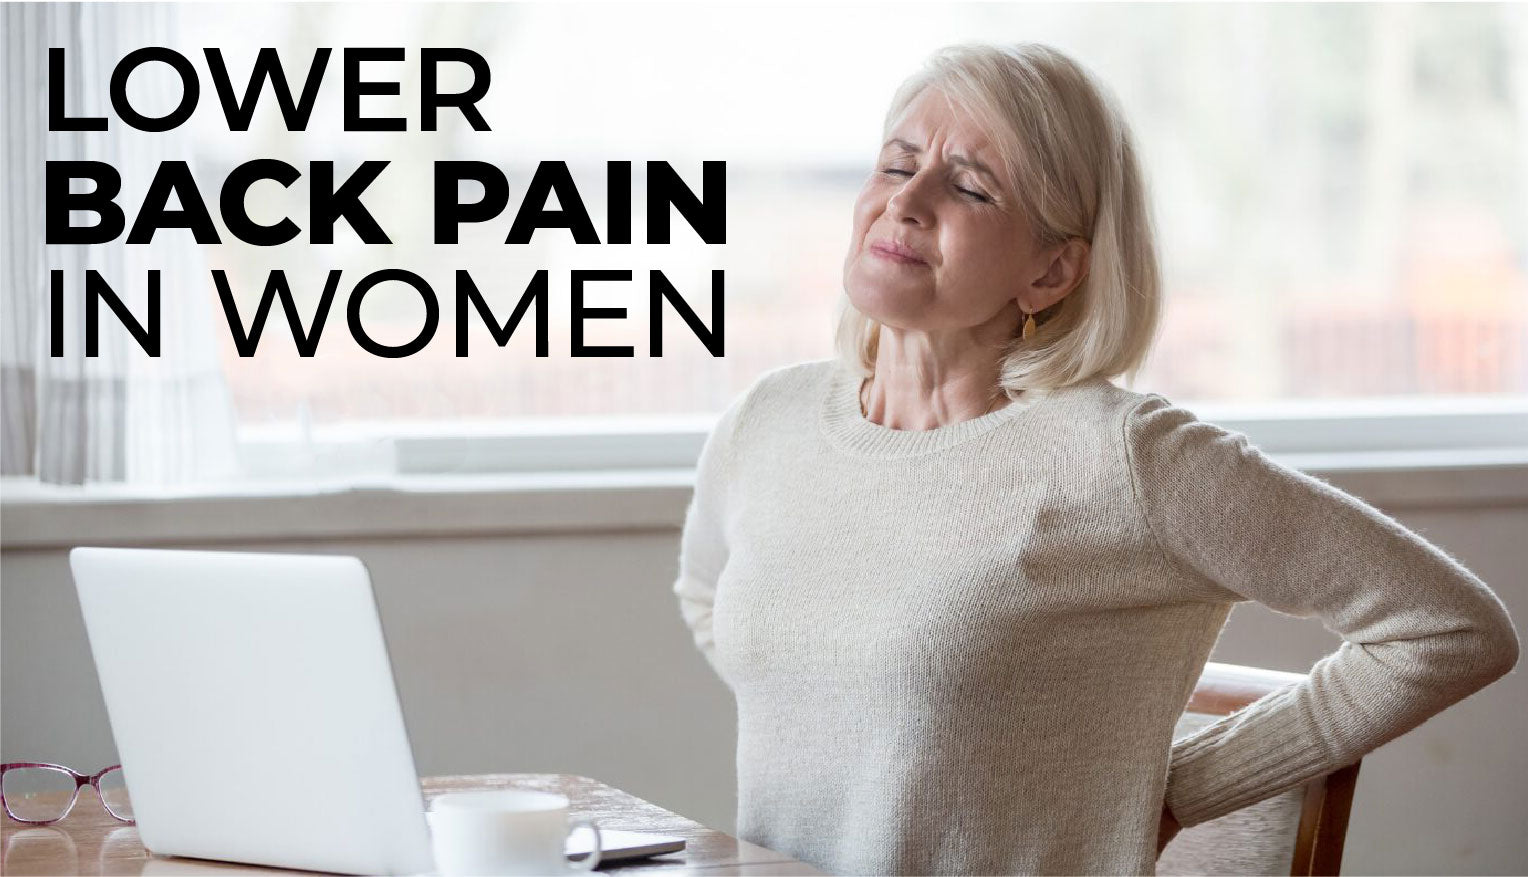 The Ultimate Guide to Female Low Back, Groin, Abdomen and Hip pain